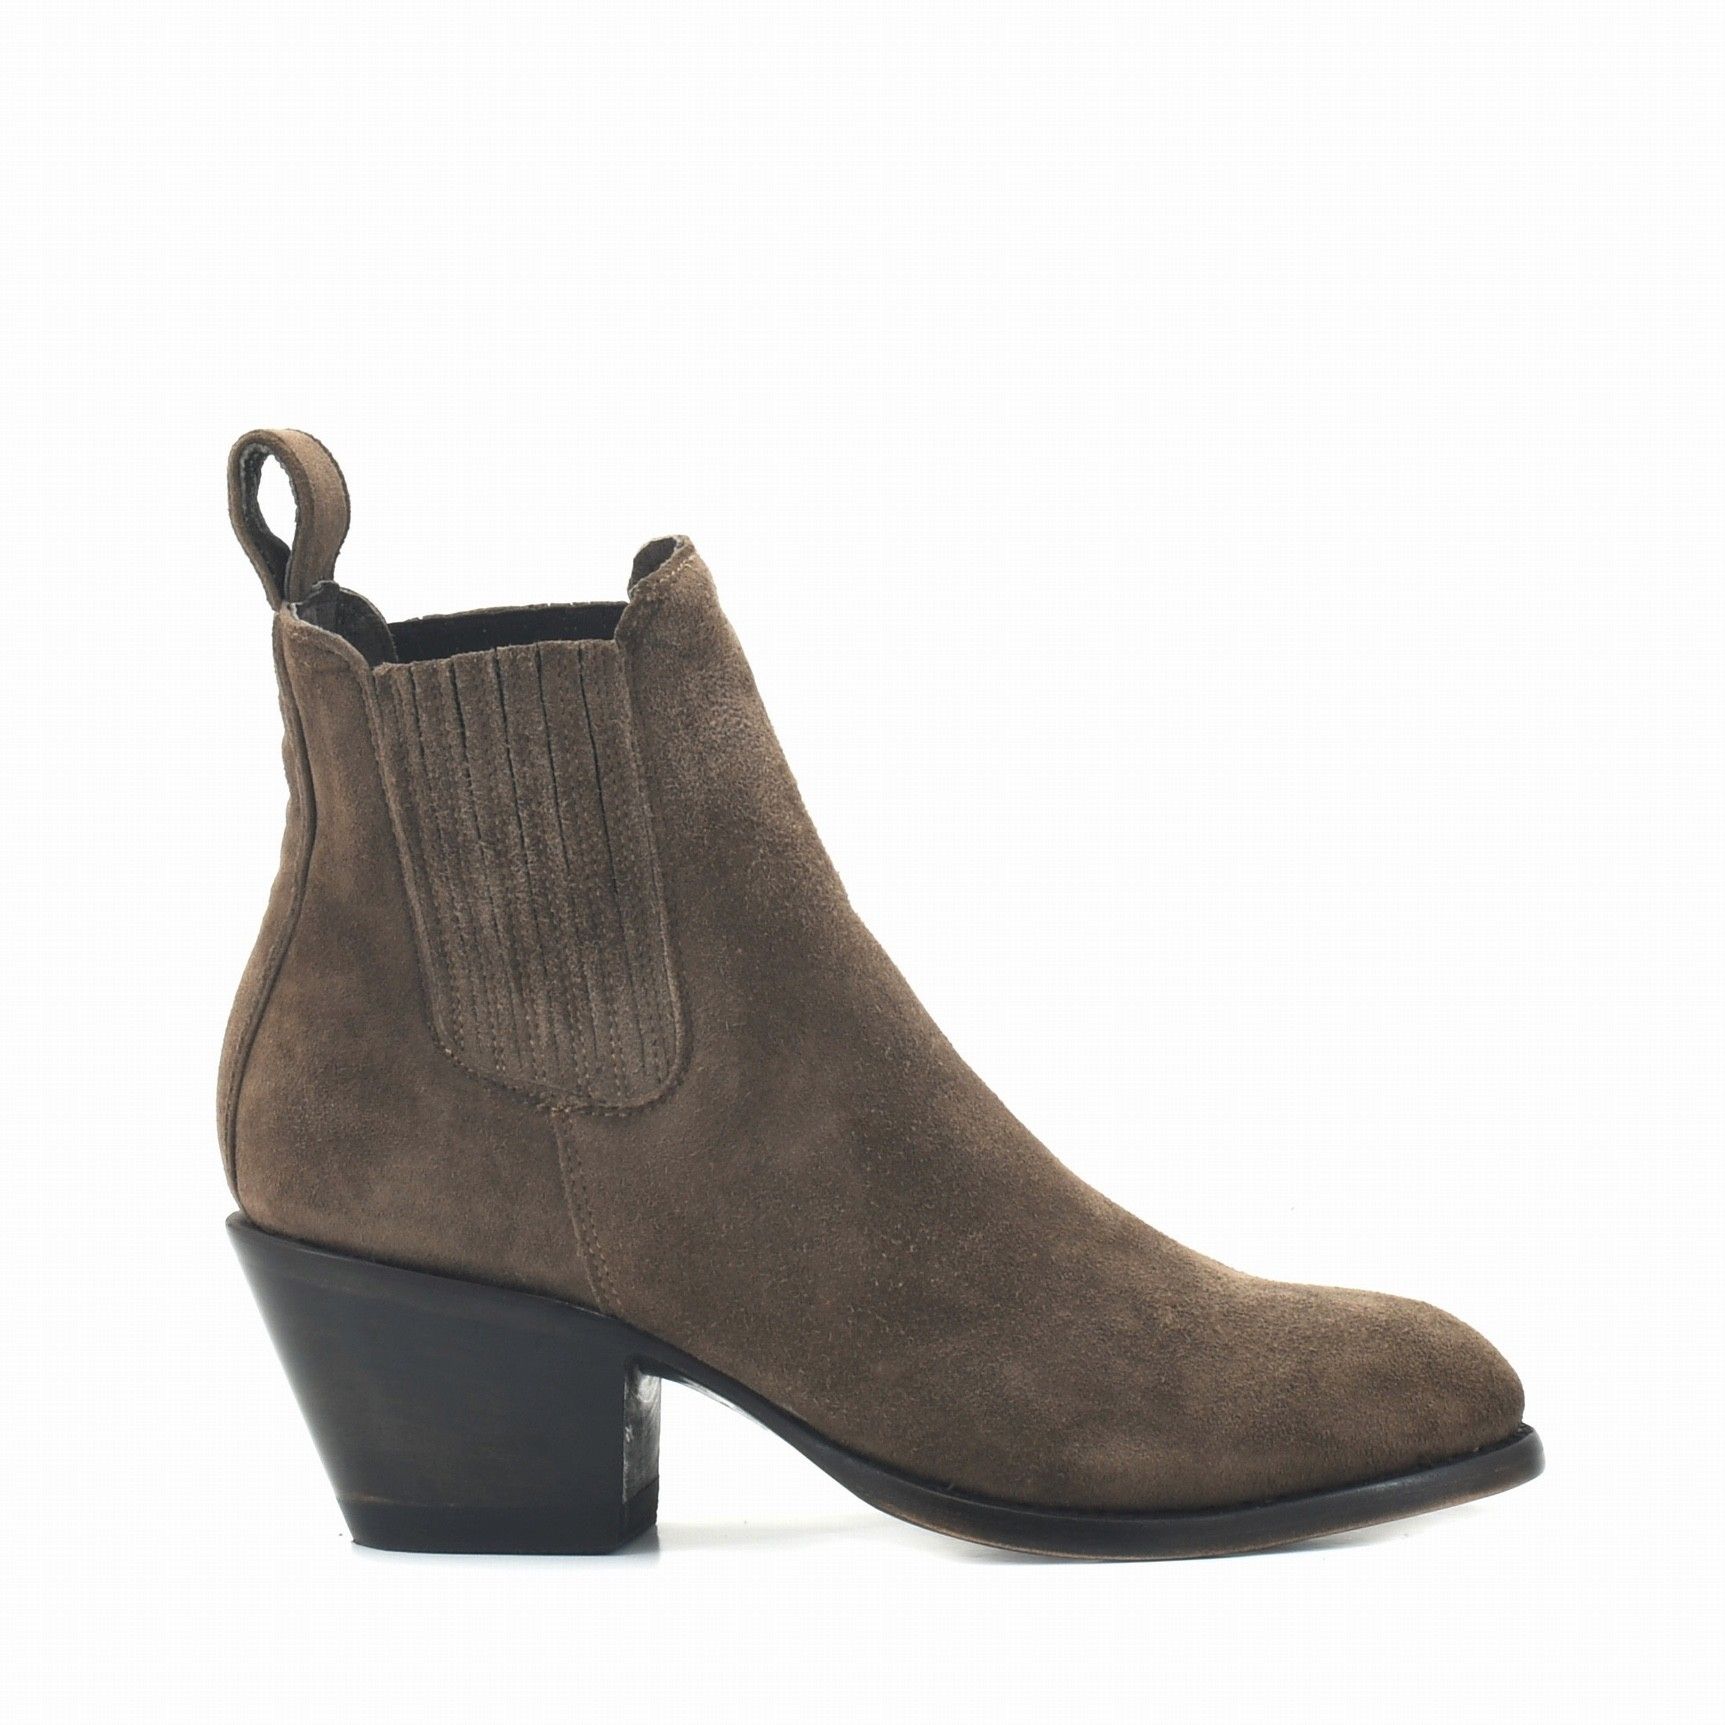 ESTUDIO BROWN SUEDE ROUNDED TOE ANKLE BOOTS FEATURING  ELASTICIZED SIDES COVERED WITH LEATHER  Total heel height 2.6 Inches  100